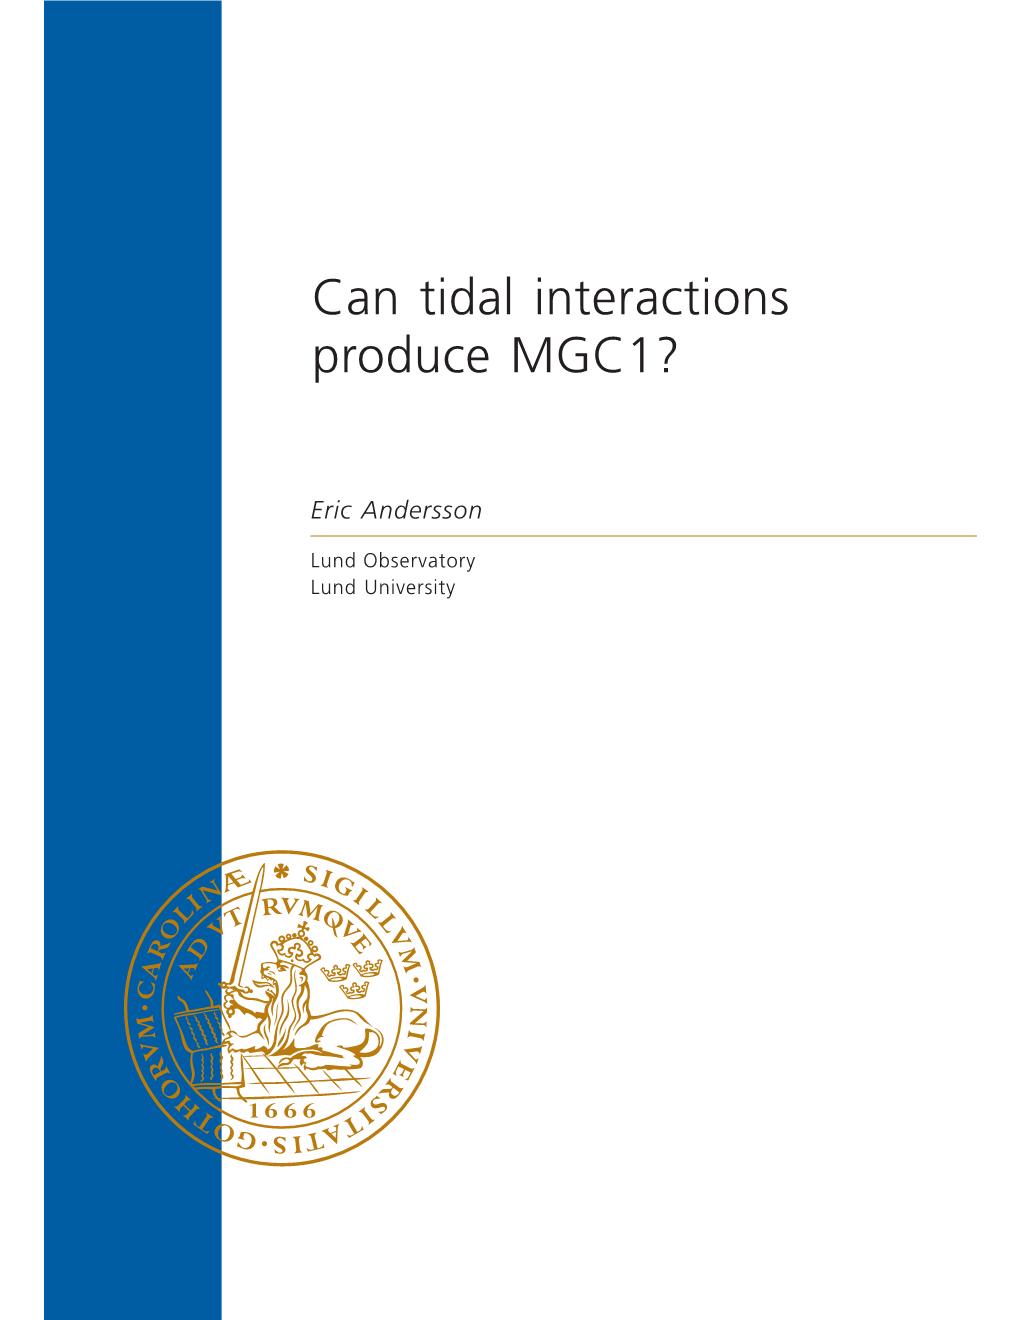 Can Tidal Interactions Produce MGC1?